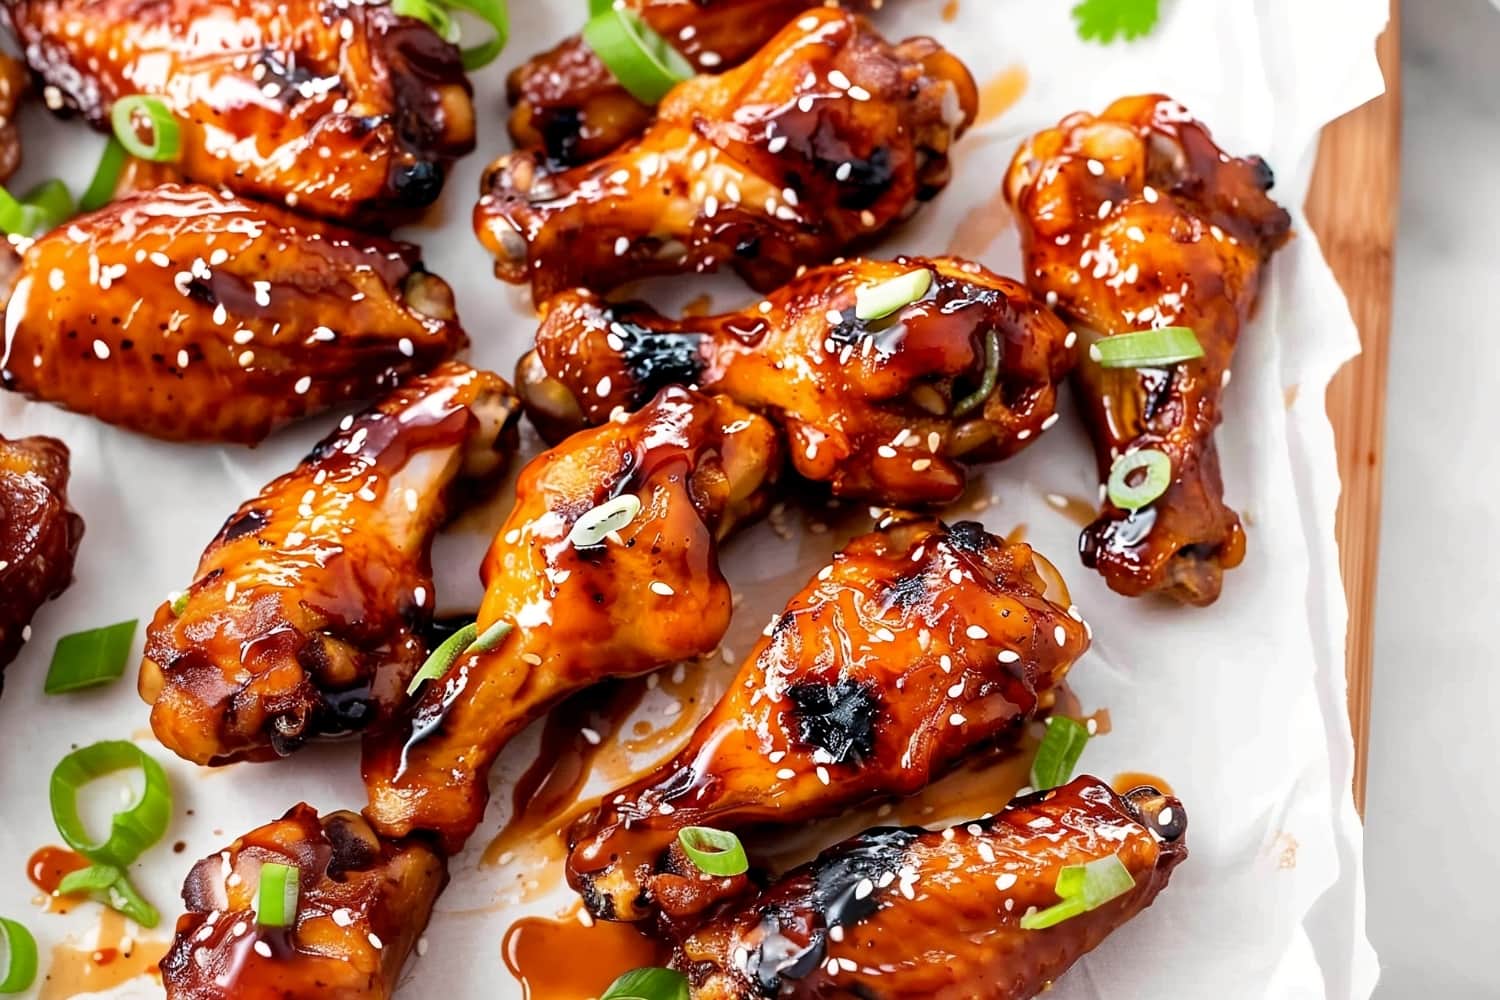 Spicy Korean chicken wings with sesame seeds and green onions on a baking sheet